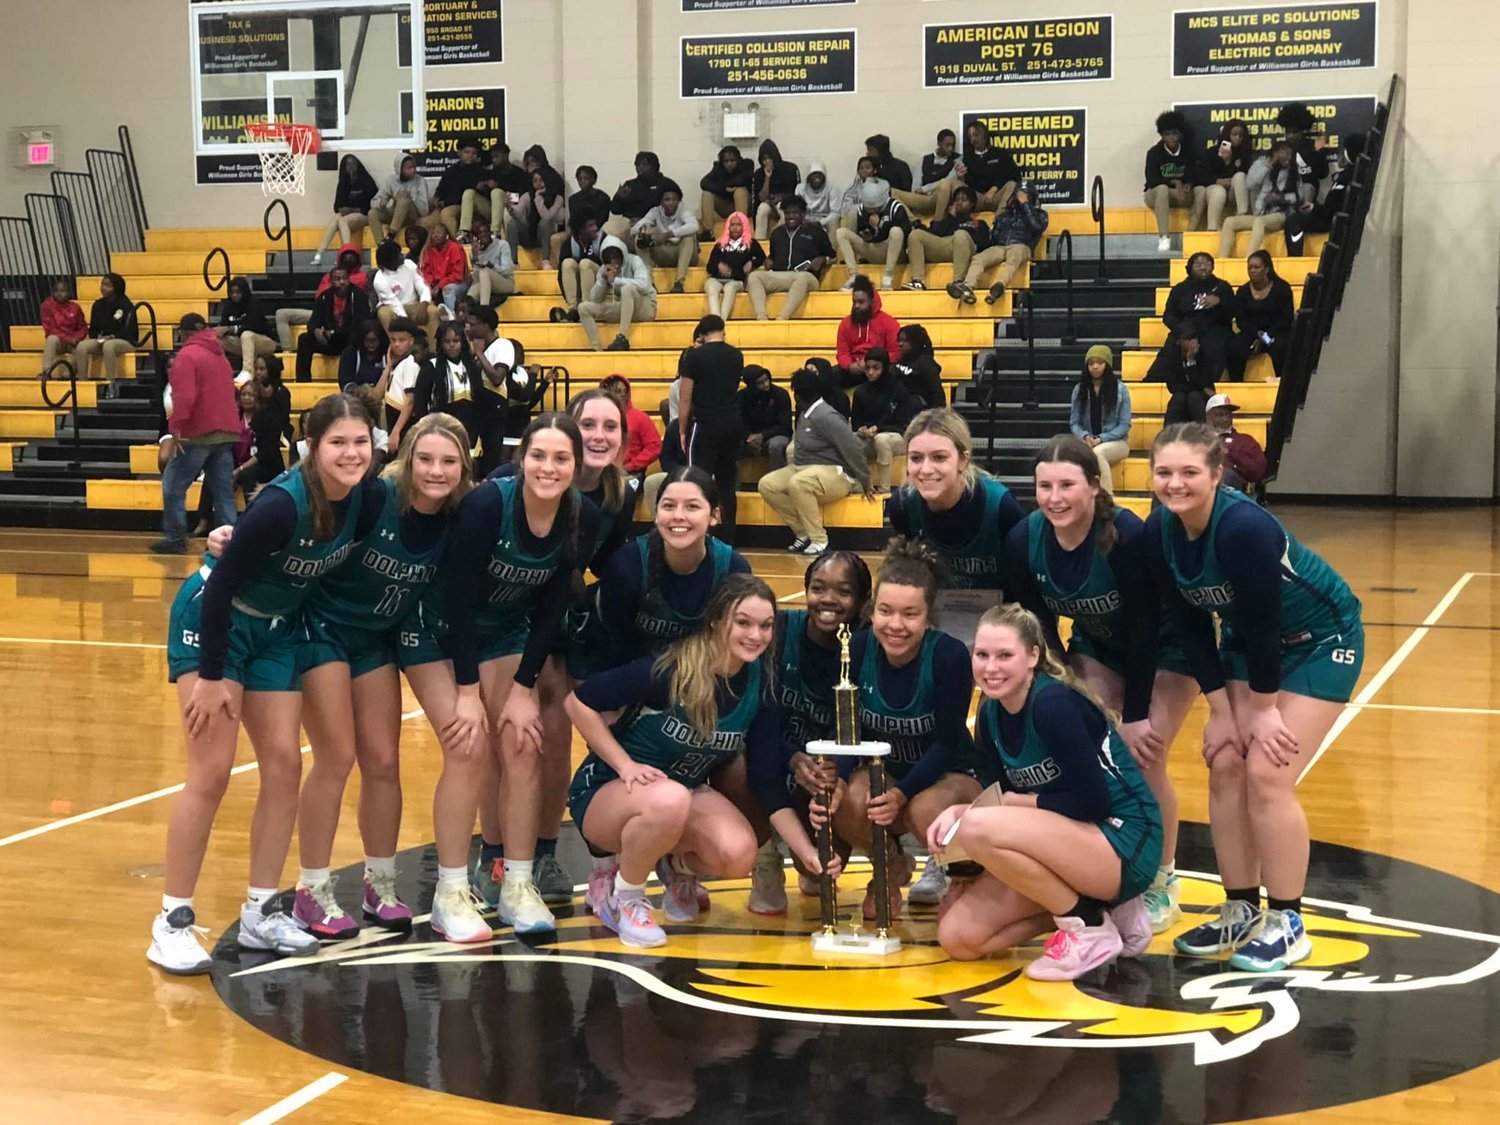 The Gulf Shores Dolphins celebrate with their fourth consecutive postseason area championship following a 35-31 win over Williamson last Thursday, Feb. 9. Gulf Shores was one of nine teams from Baldwin County entering the AHSAA state tournament.